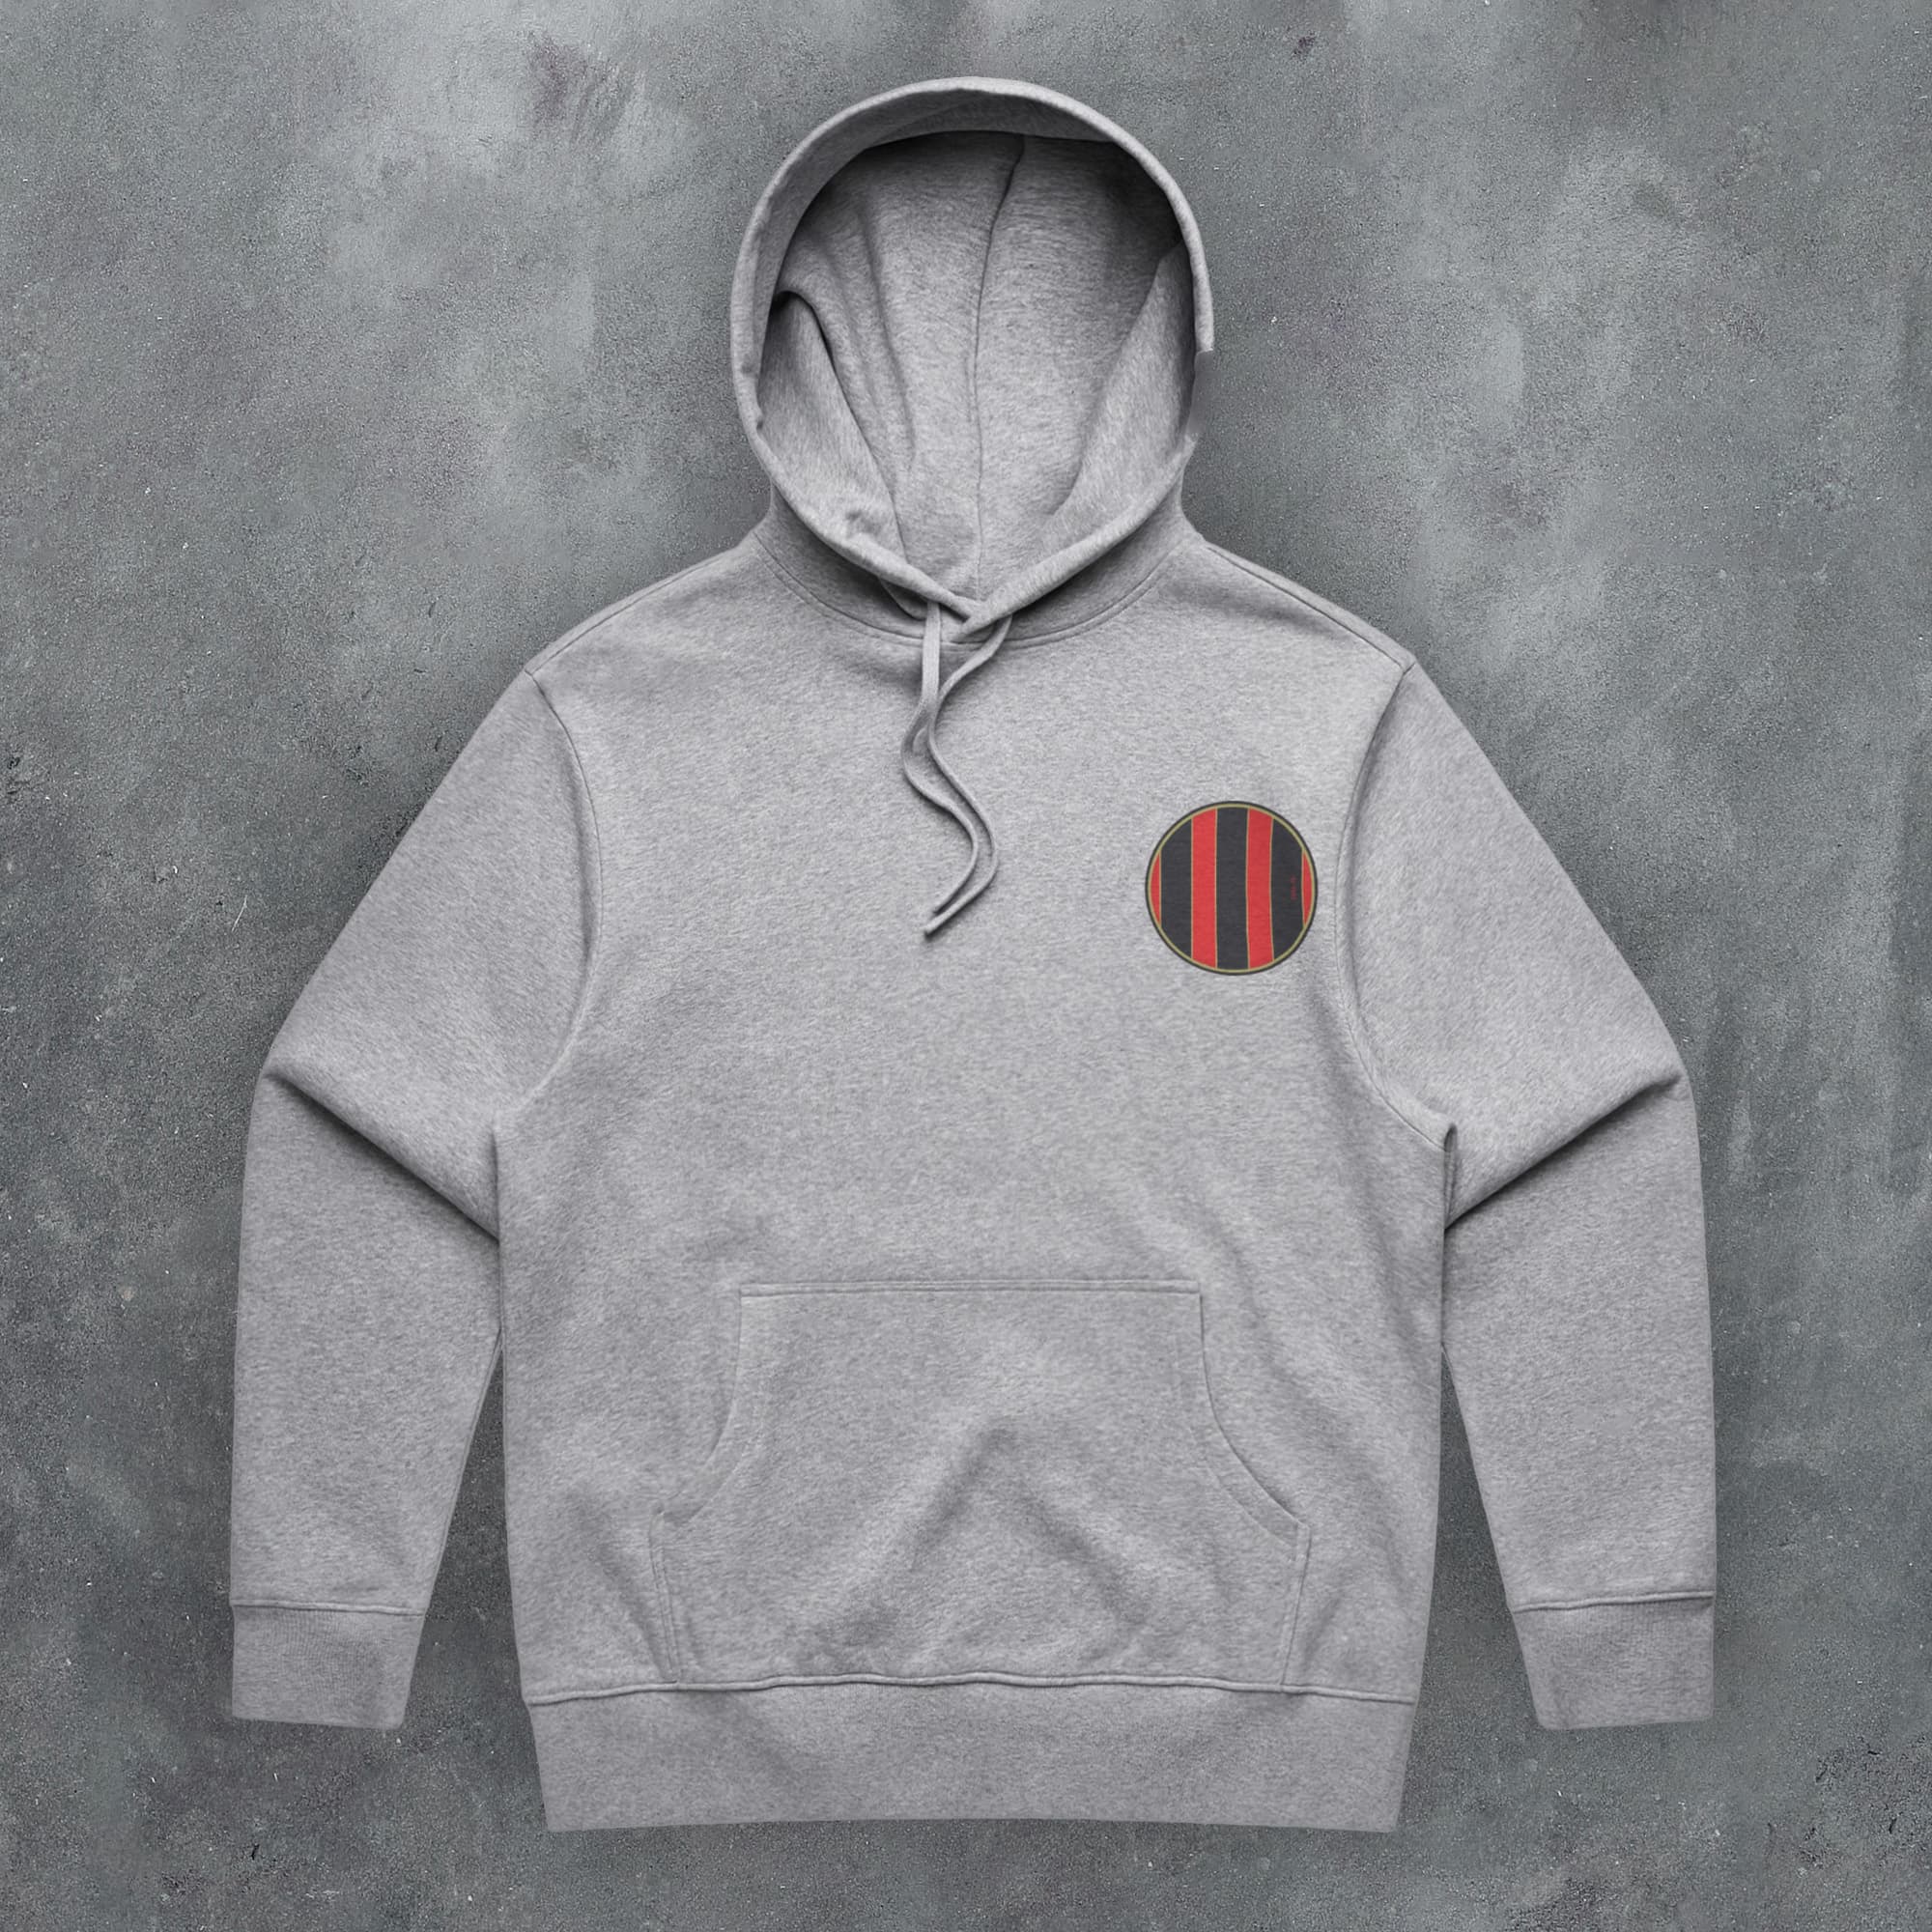 a grey hoodie with a red and black stripe on it